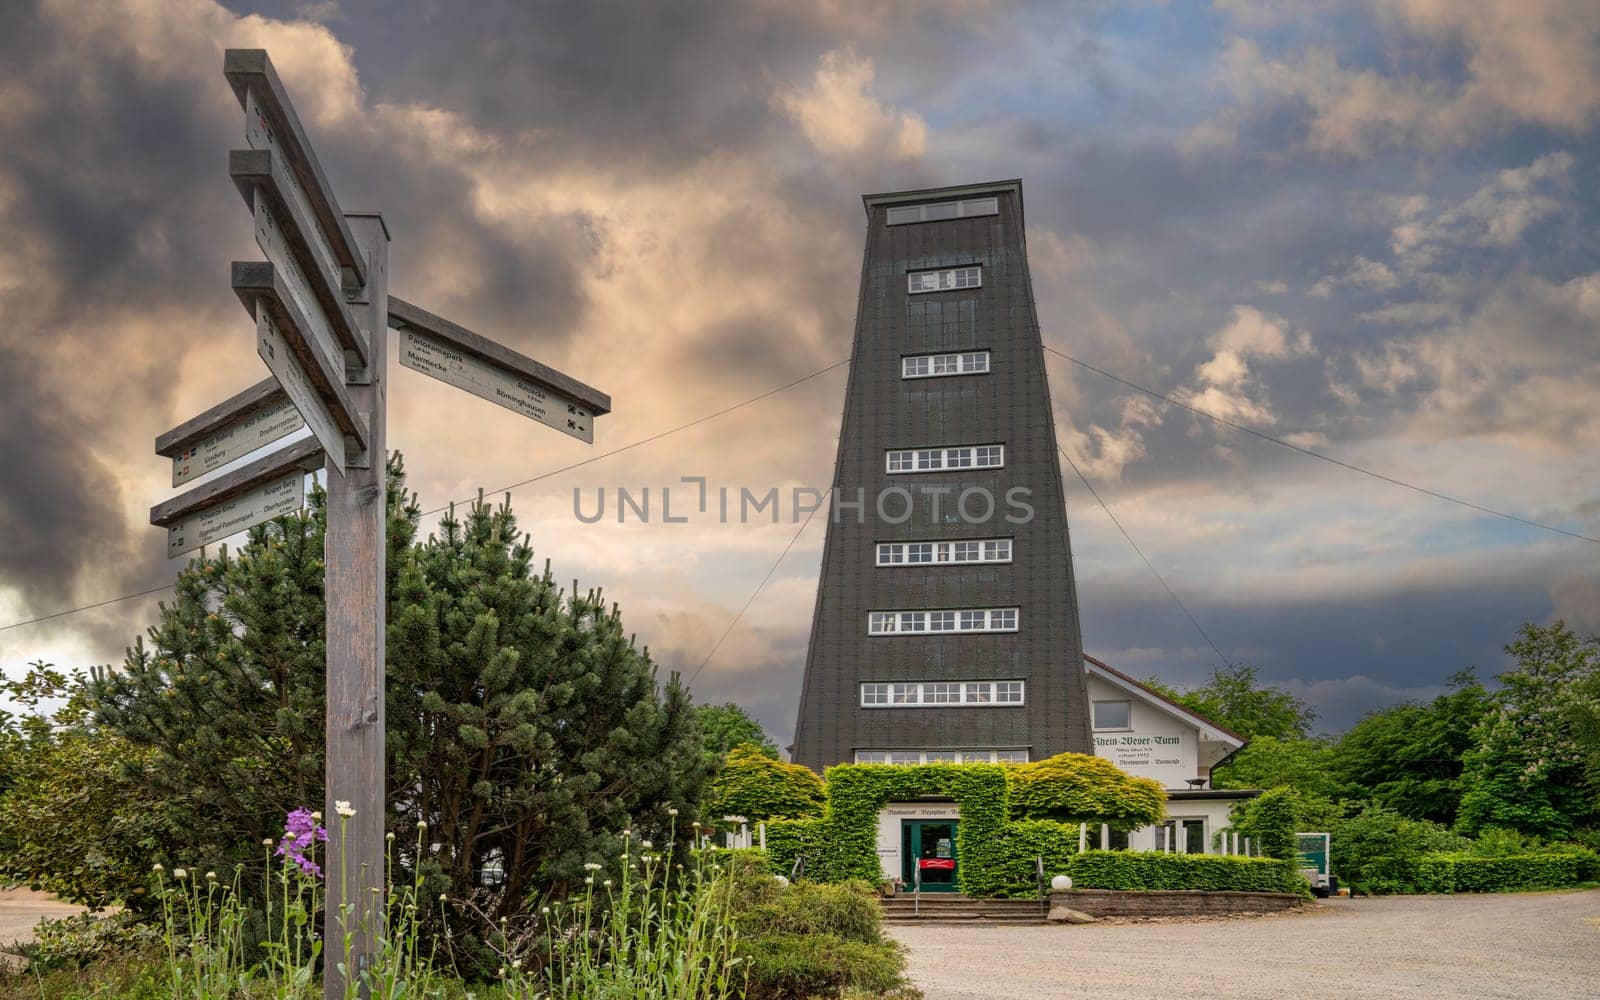 RHINE WESER TOWER, GERMANY - JUNE 7, 2023: Panoramic image of Rhine Weser Tower, tourist attraction on the long distance hiking trail Rothaarsteig on June 7, 2023 in Germany